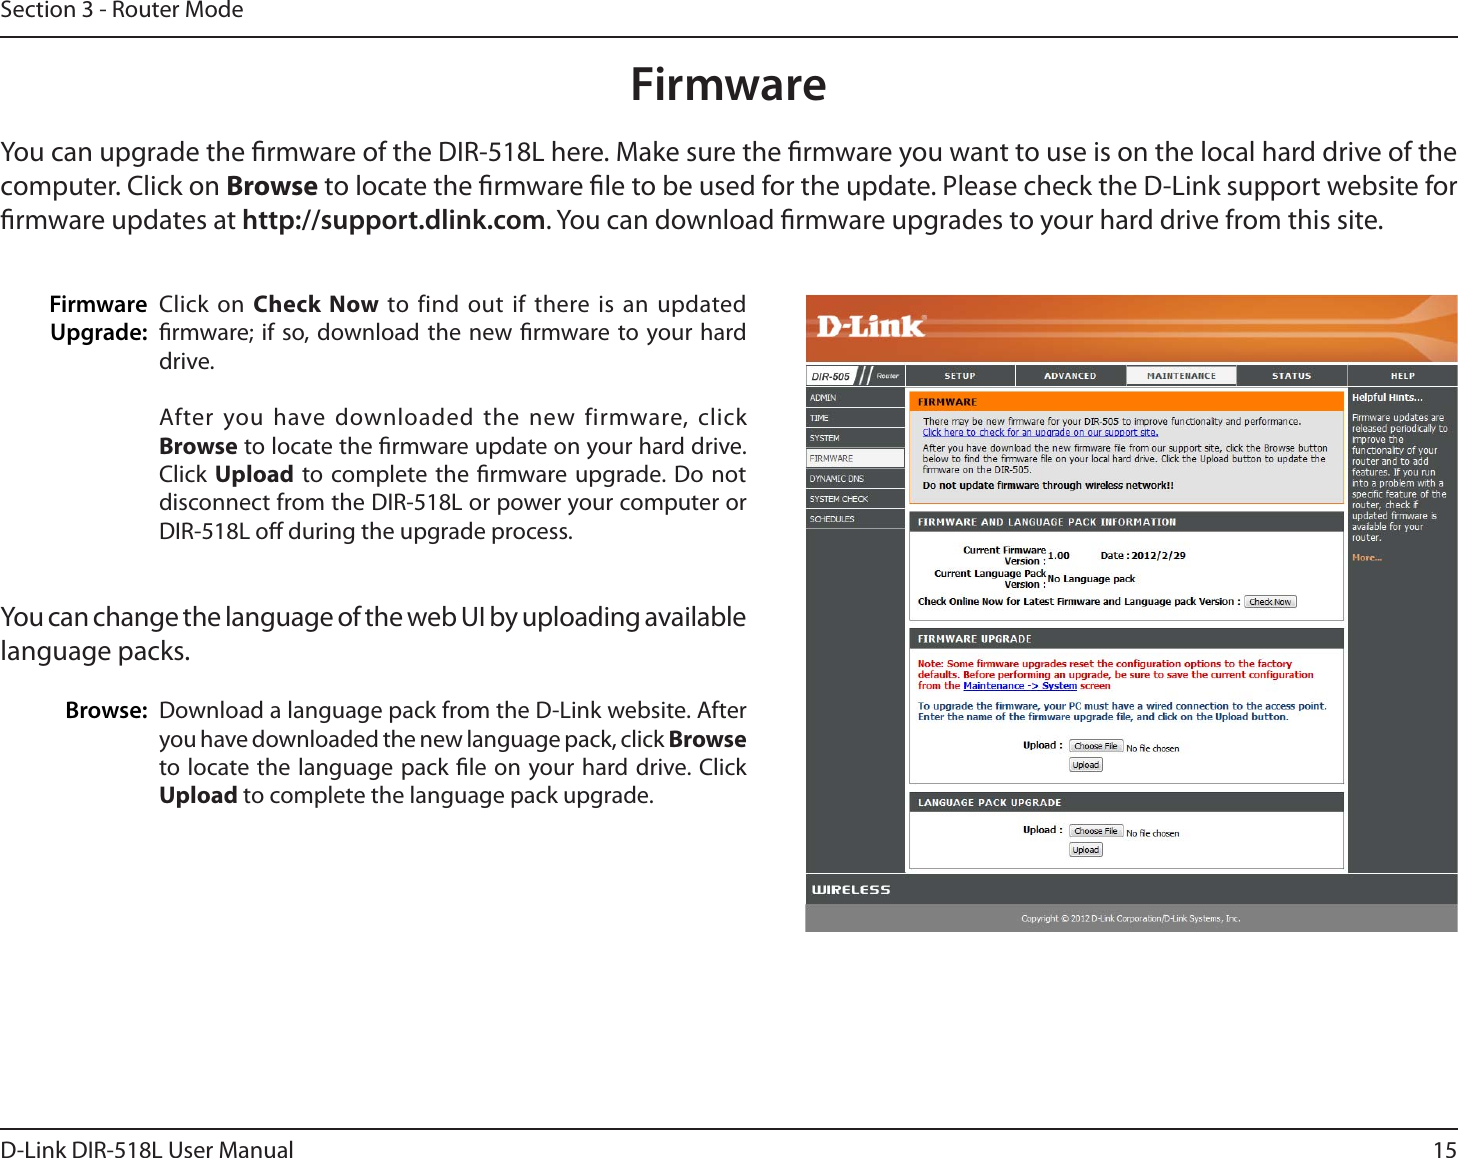 15D-Link DIR-518L User ManualSection 3 - Router ModeFirmwareUpgrade: FirmwareYou can upgrade the rmware of the DIR-518L here. Make sure the rmware you want to use is on the local hard drive of the computer. Click on Browse to locate the rmware le to be used for the update. Please check the D-Link support website for rmware updates at http://support.dlink.com. You can download rmware upgrades to your hard drive from this site.Download a language pack from the D-Link website. After you have downloaded the new language pack, click Browseto locate the language pack le on your hard drive. Click Upload to complete the language pack upgrade.You can change the language of the web UI by uploading available language packs.Browse:Click on Check Now to find out if there is an updated rmware; if so, download the new rmware to your hard drive.After you have downloaded the new firmware, click Browse to locate the rmware update on your hard drive. Click Upload to complete the rmware upgrade. Do not disconnect from the DIR-518L or power your computer or DIR-518L o during the upgrade process.